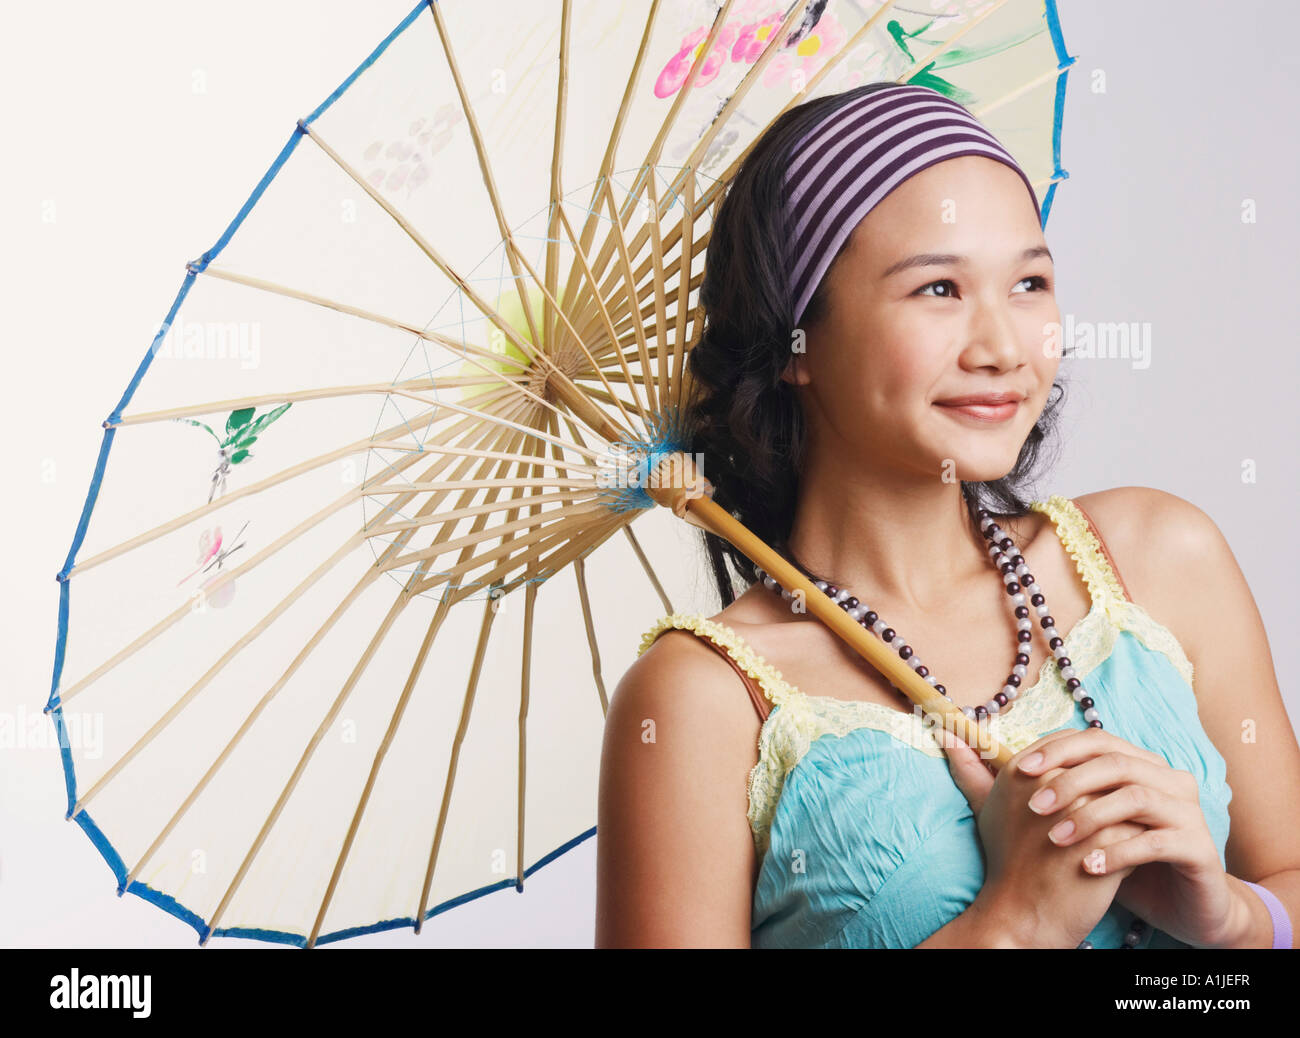 Close-up of a young woman holding a parasol and smiling Stock Photo